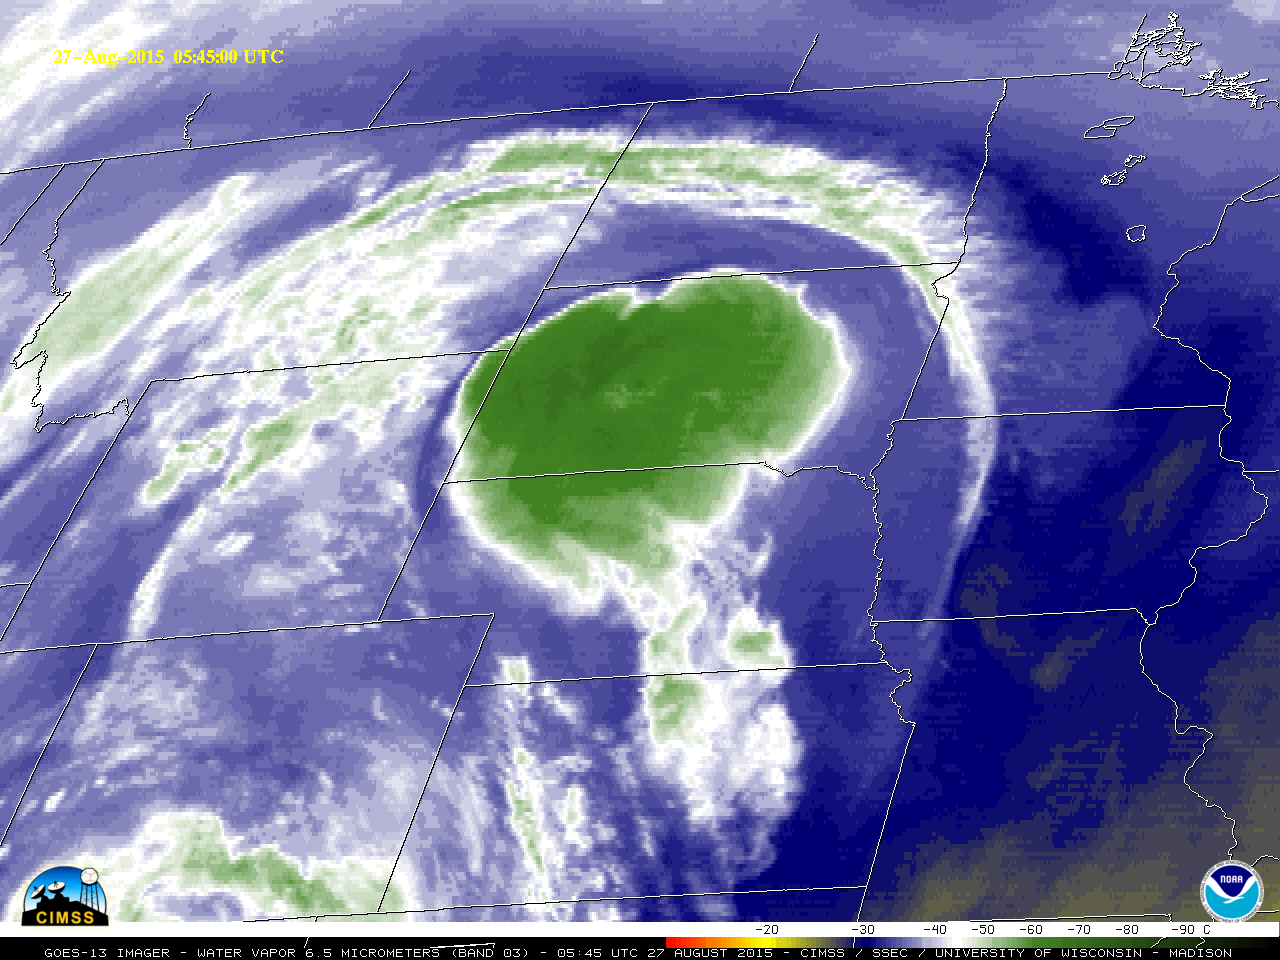 GOES-13 water vapor (6.5 µm) images [click to play animation]